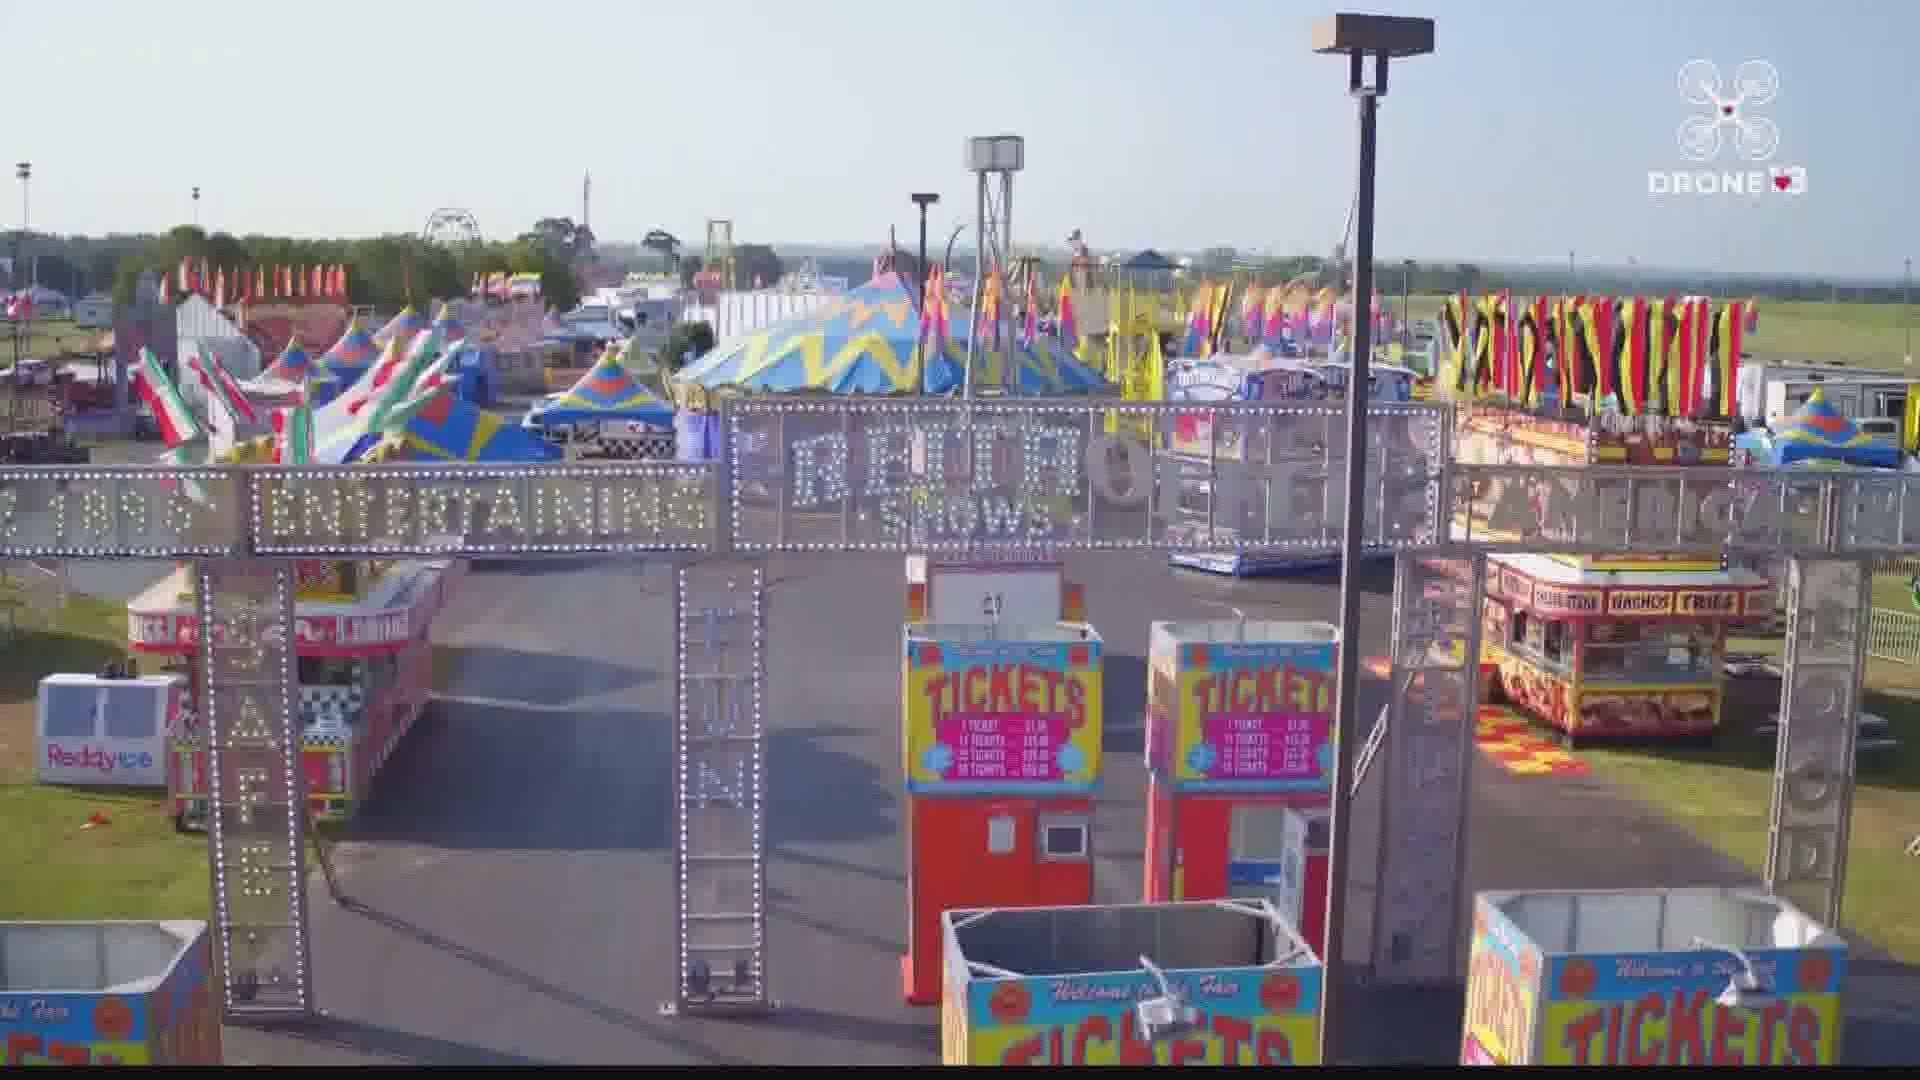 There will be no funnel cakes or ferris wheels at the Georgia National Fairgrounds this year, because the 2020 fair in Perry is canceled.